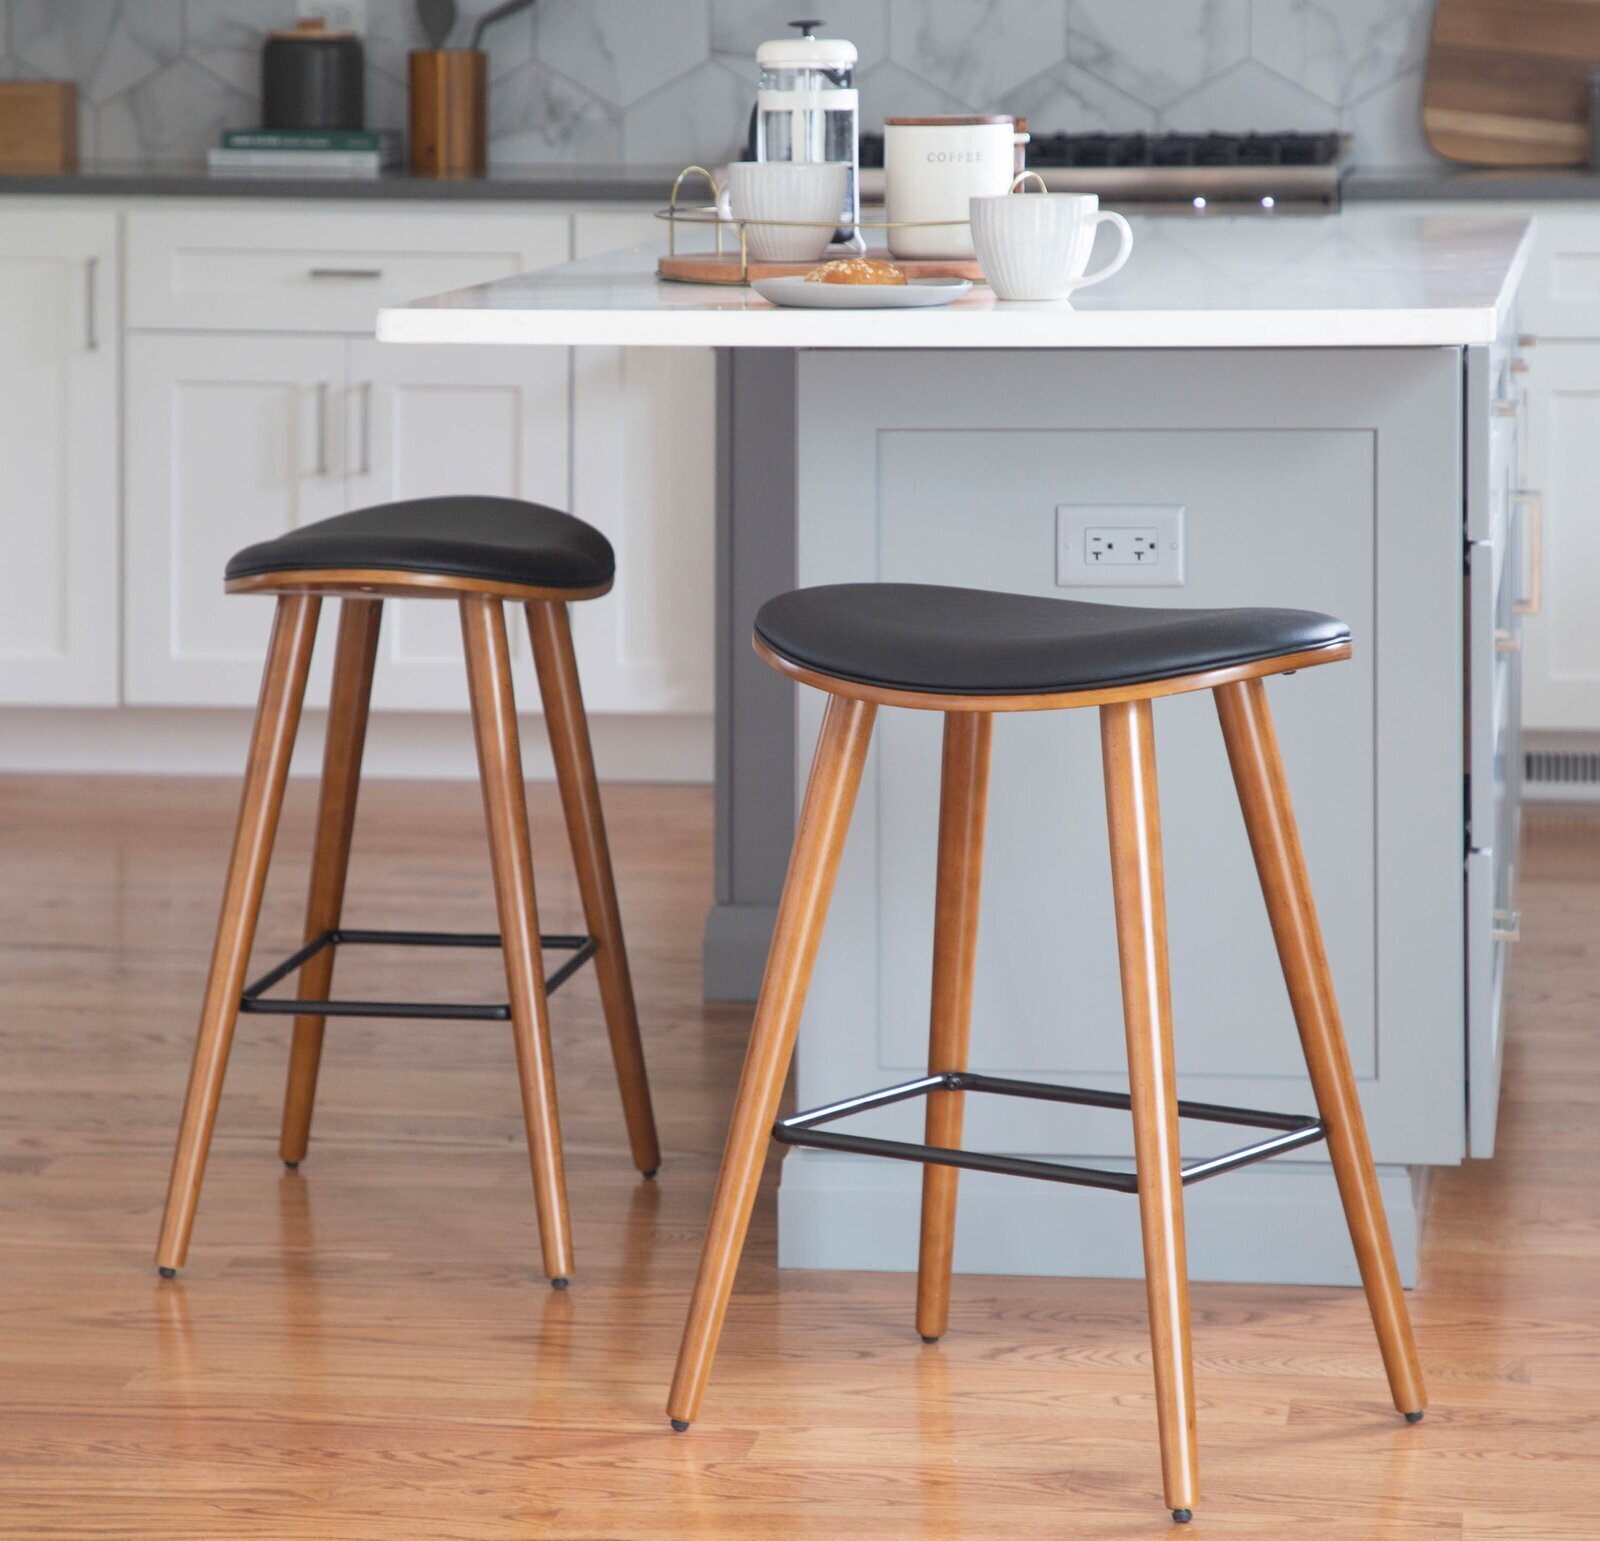 Simple styled Leather Saddle Counter Stools